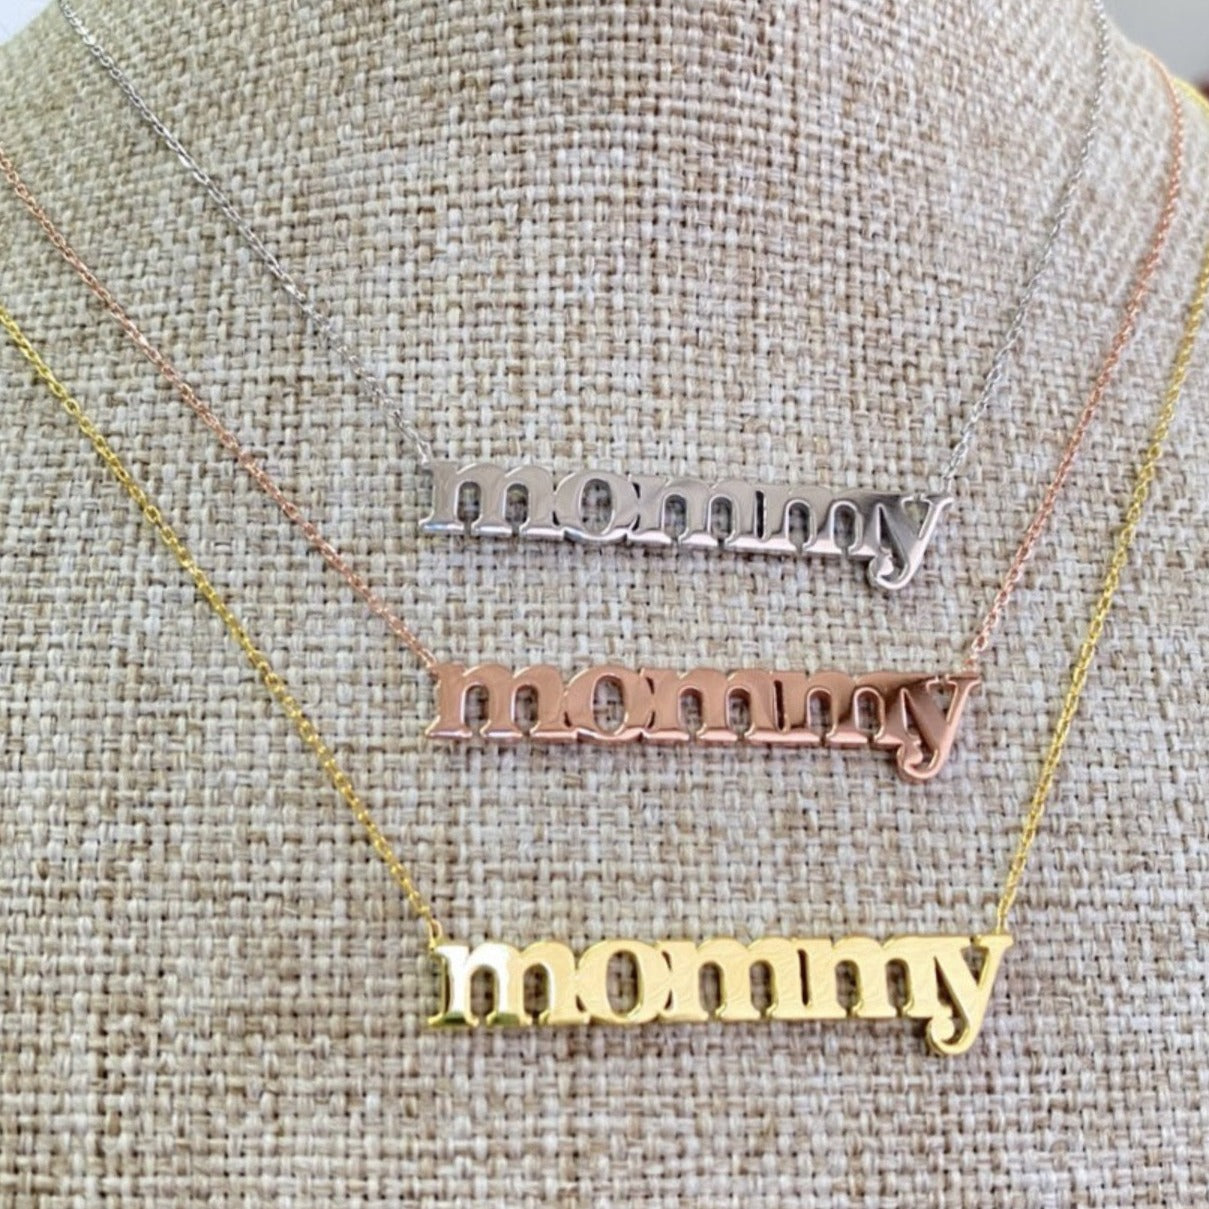 “mommy” Necklace - Retail Therapy Jewelry